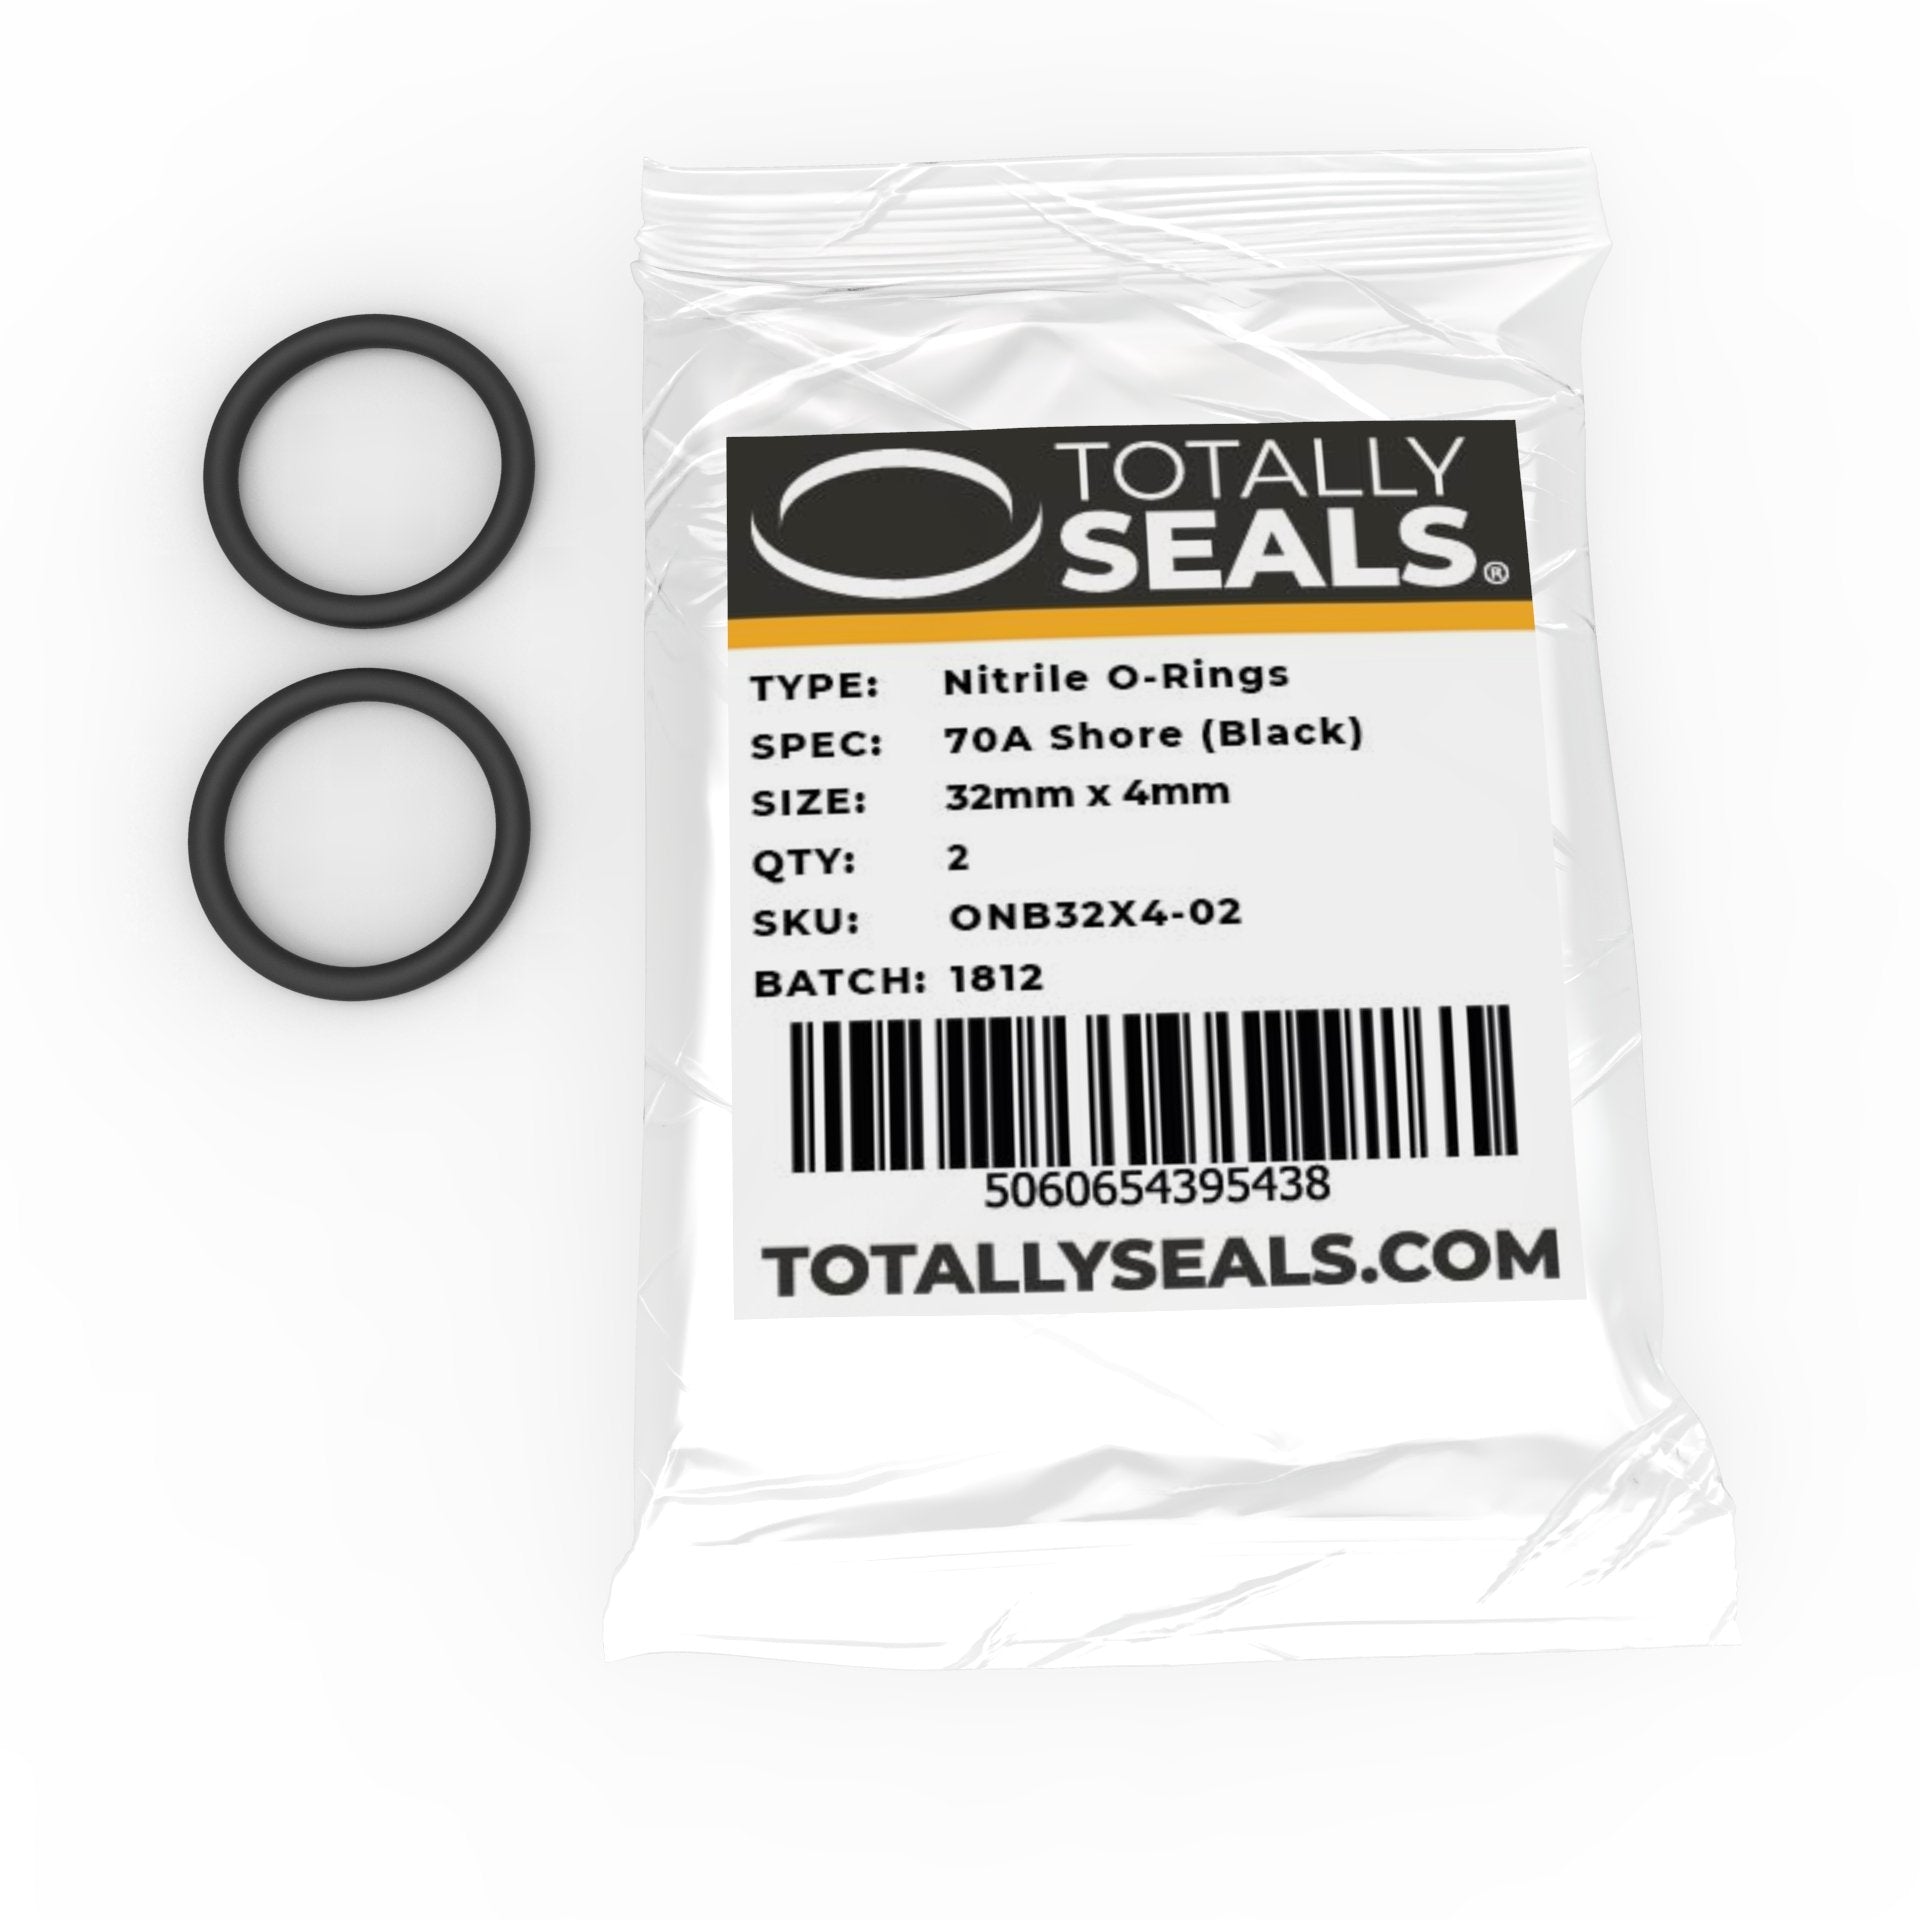 32mm x 4mm (40mm OD) Nitrile O-Rings - Totally Seals®